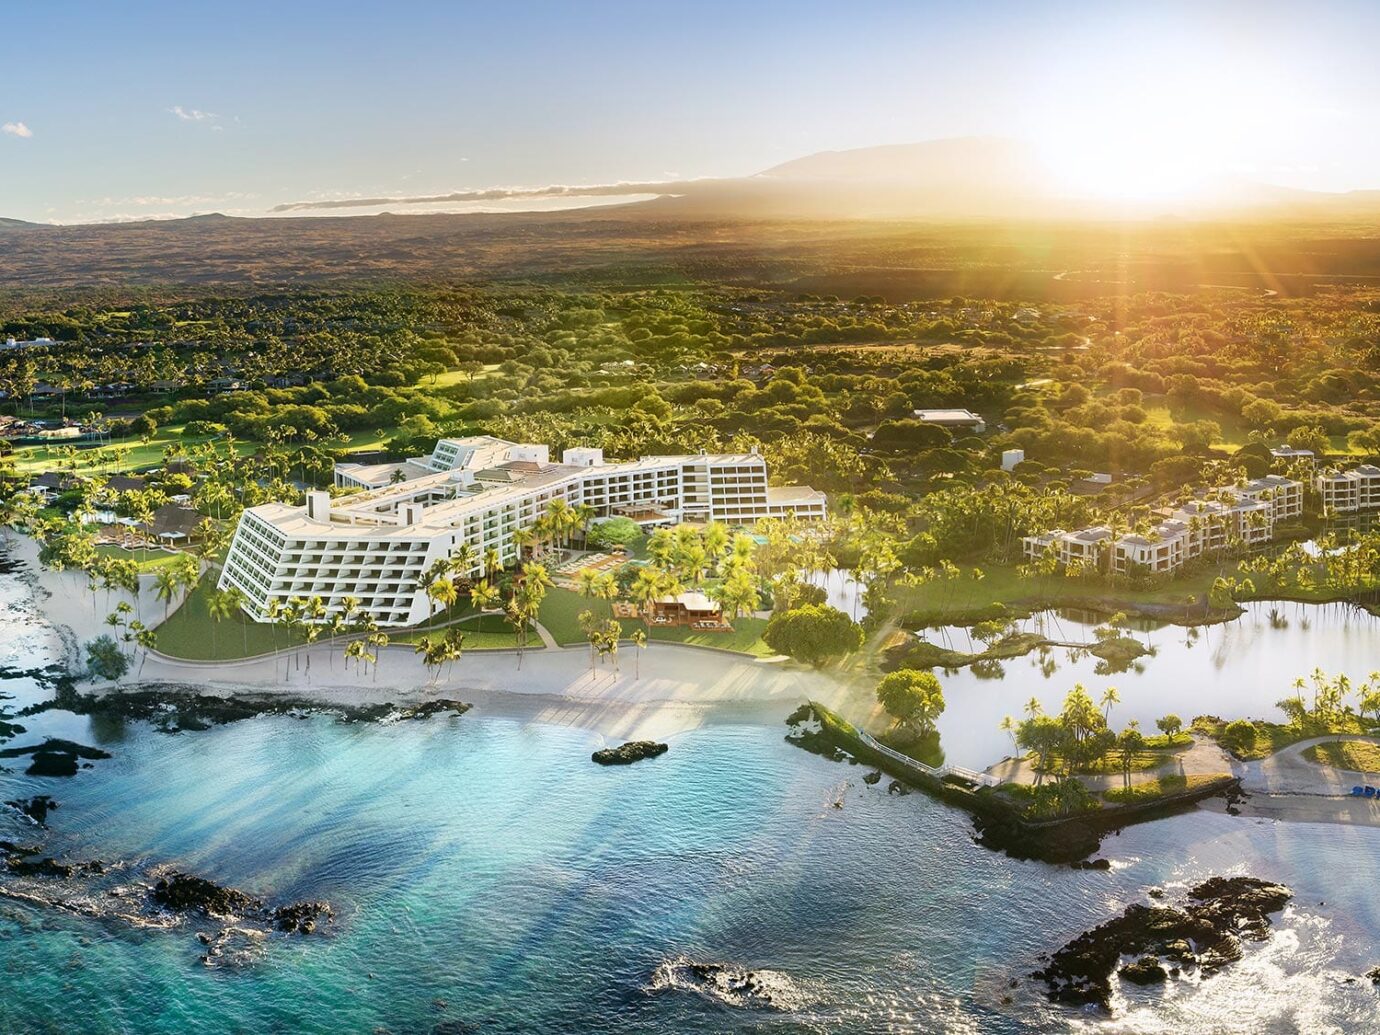 Aerial view of Mauna Lani, Auberge Resorts Collection in Hawaii